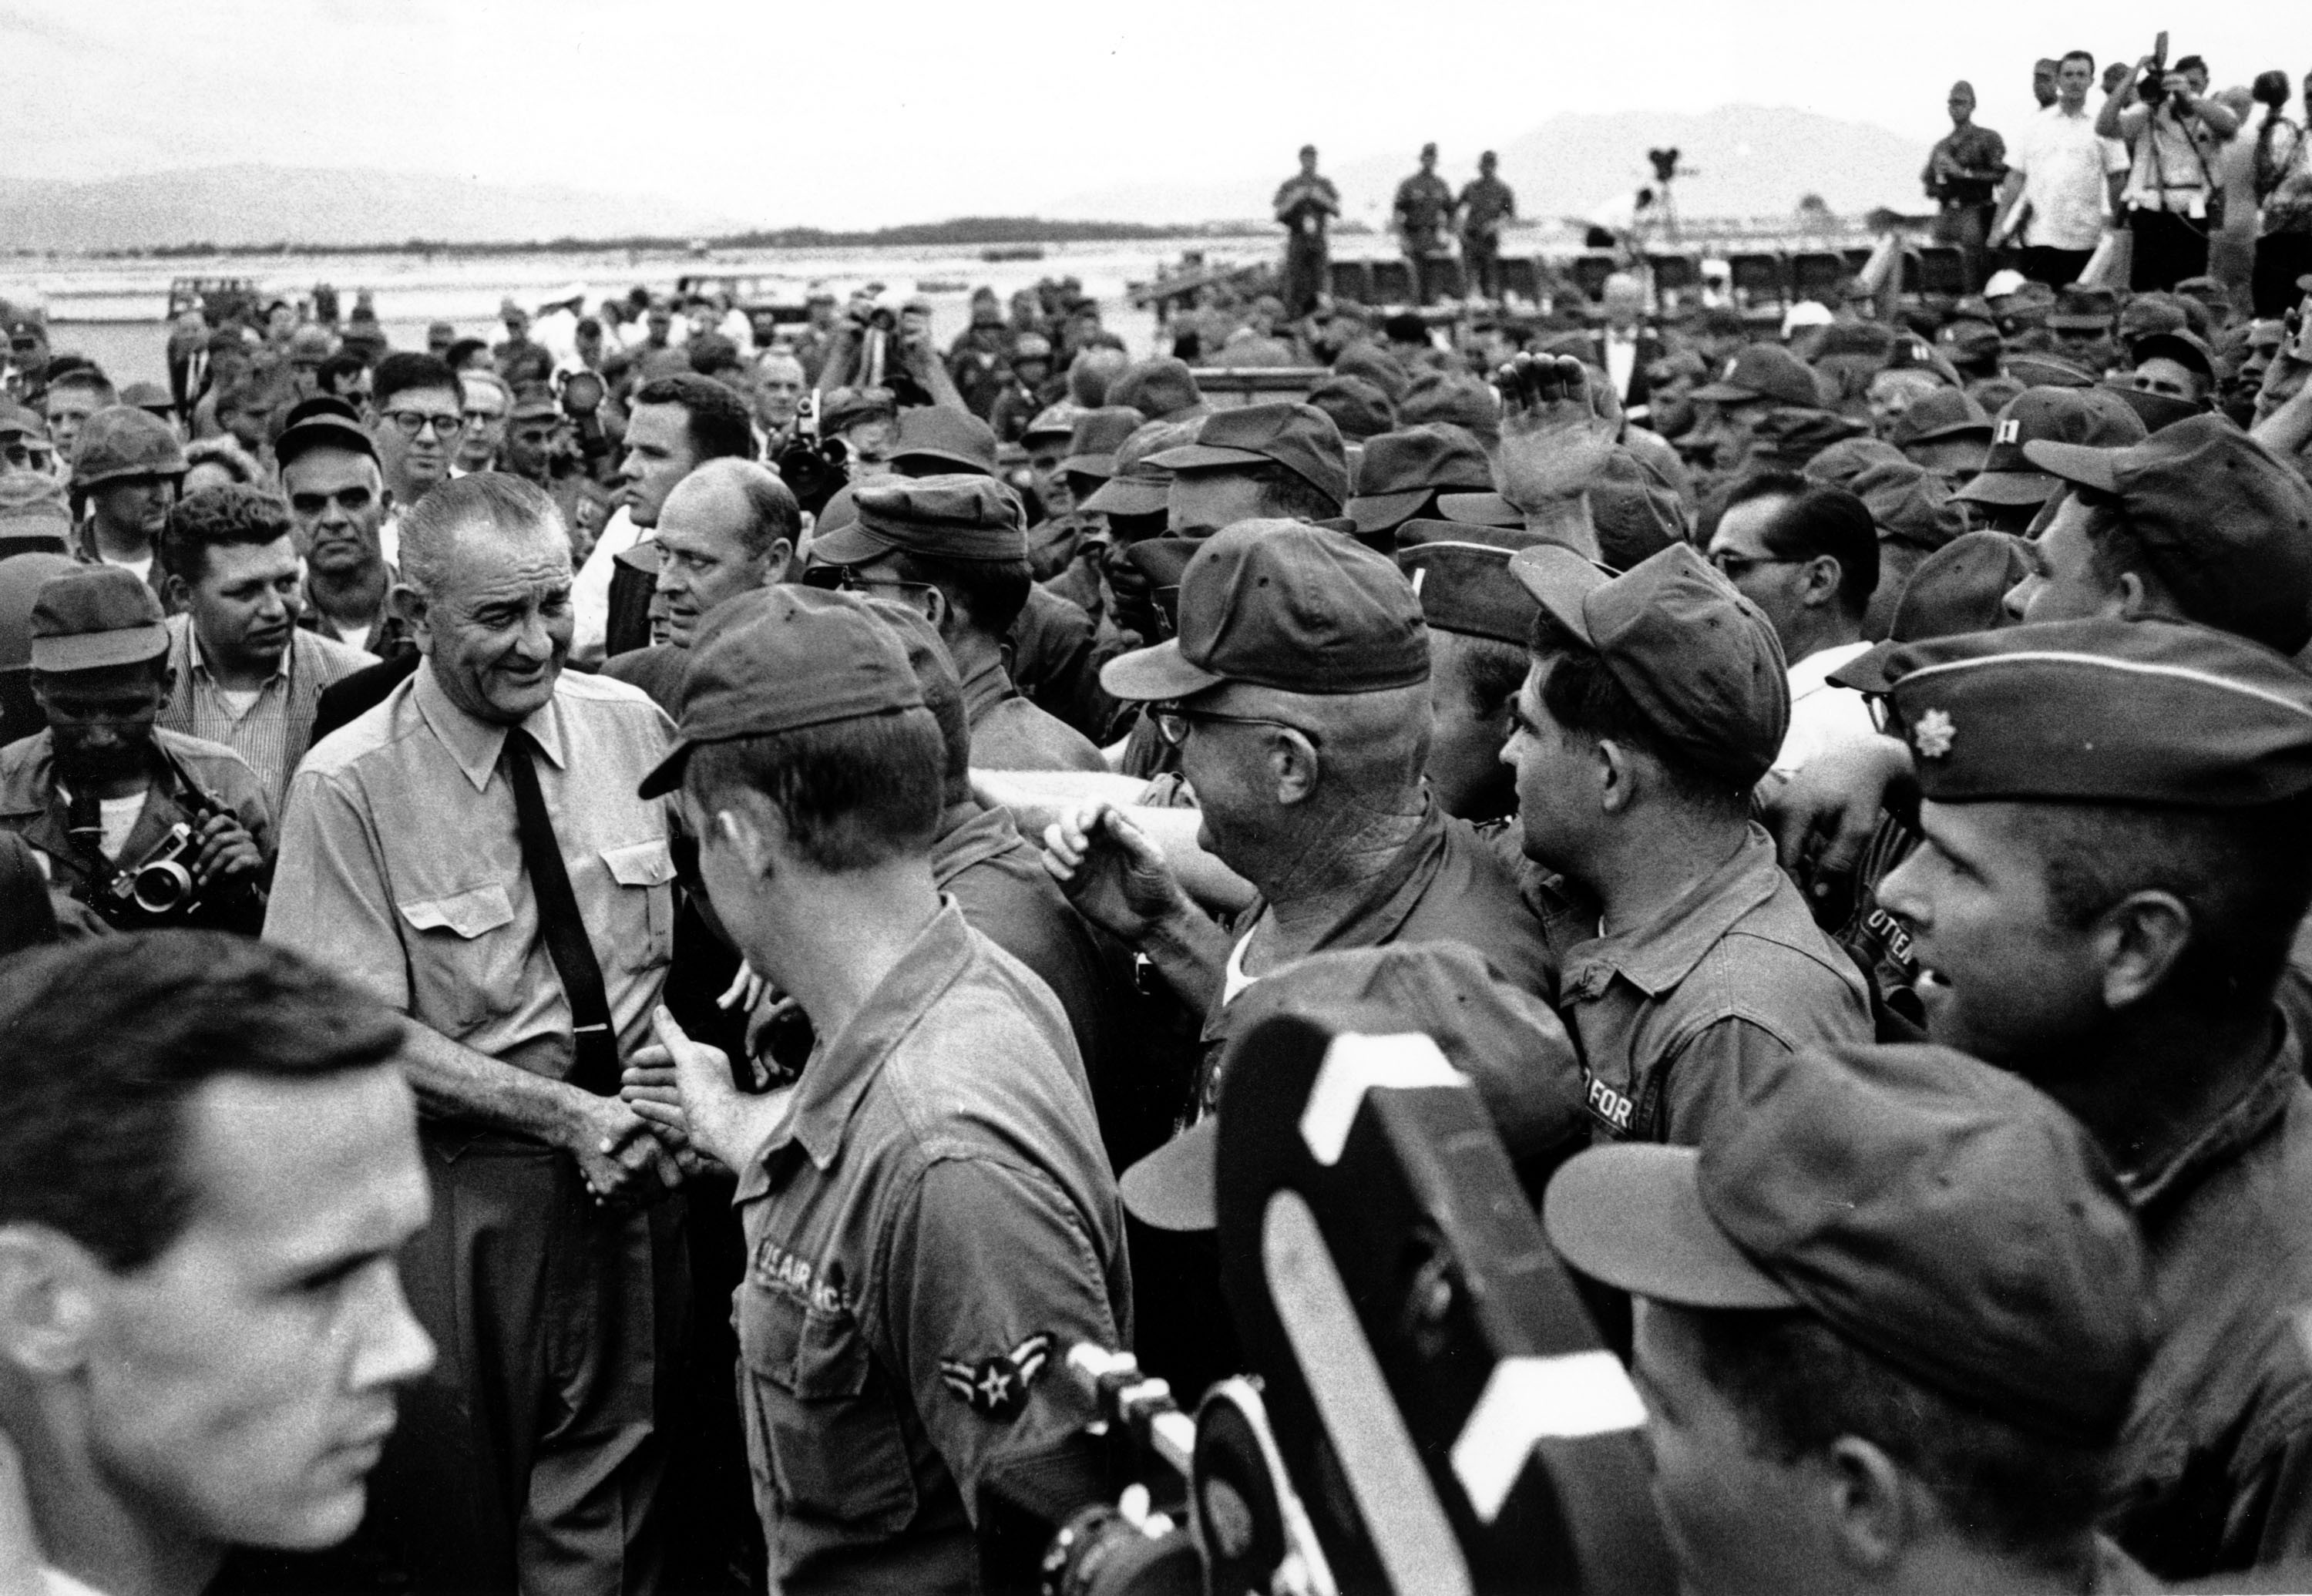 A crowd of American soldiers swarm around U.S. President Johnson on Oct. 26, 1966 shortly after his arrival at Cam Rahn Bay in South Vietnam visiting troops during the war.  (AP Photo)